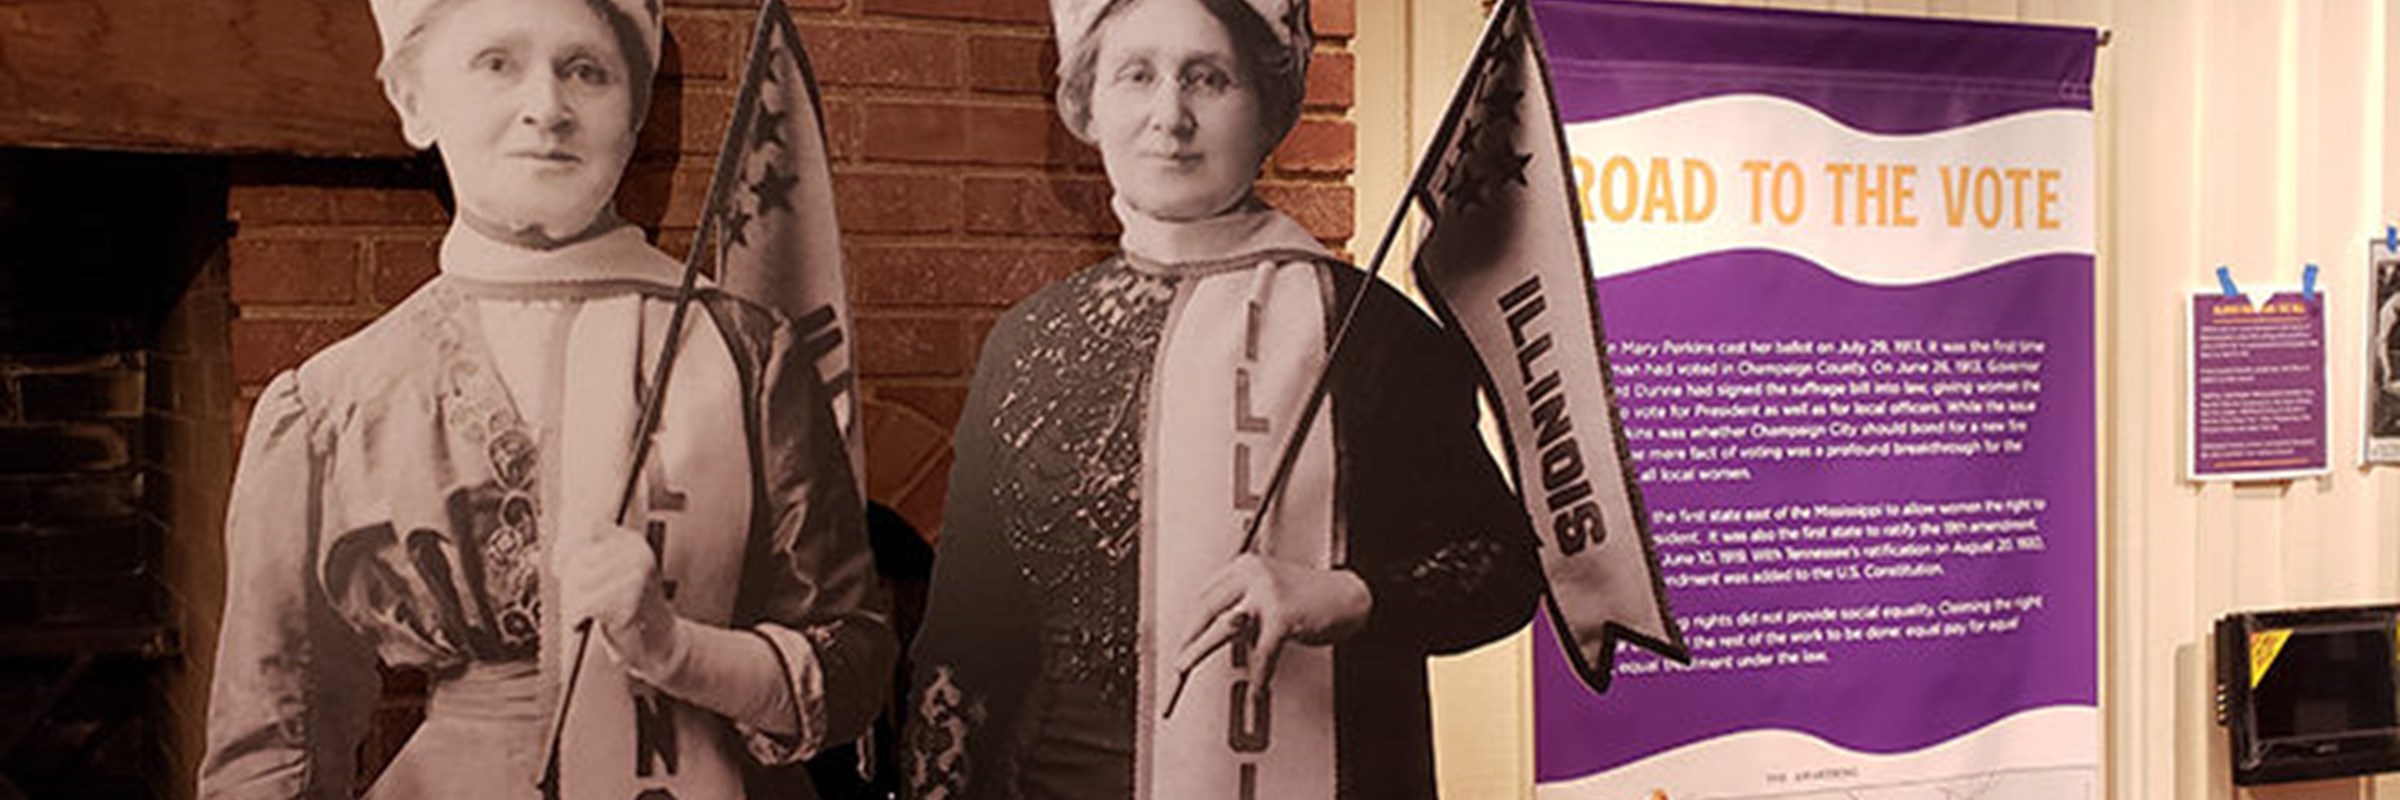 Women's Suffrage Story to Be Told